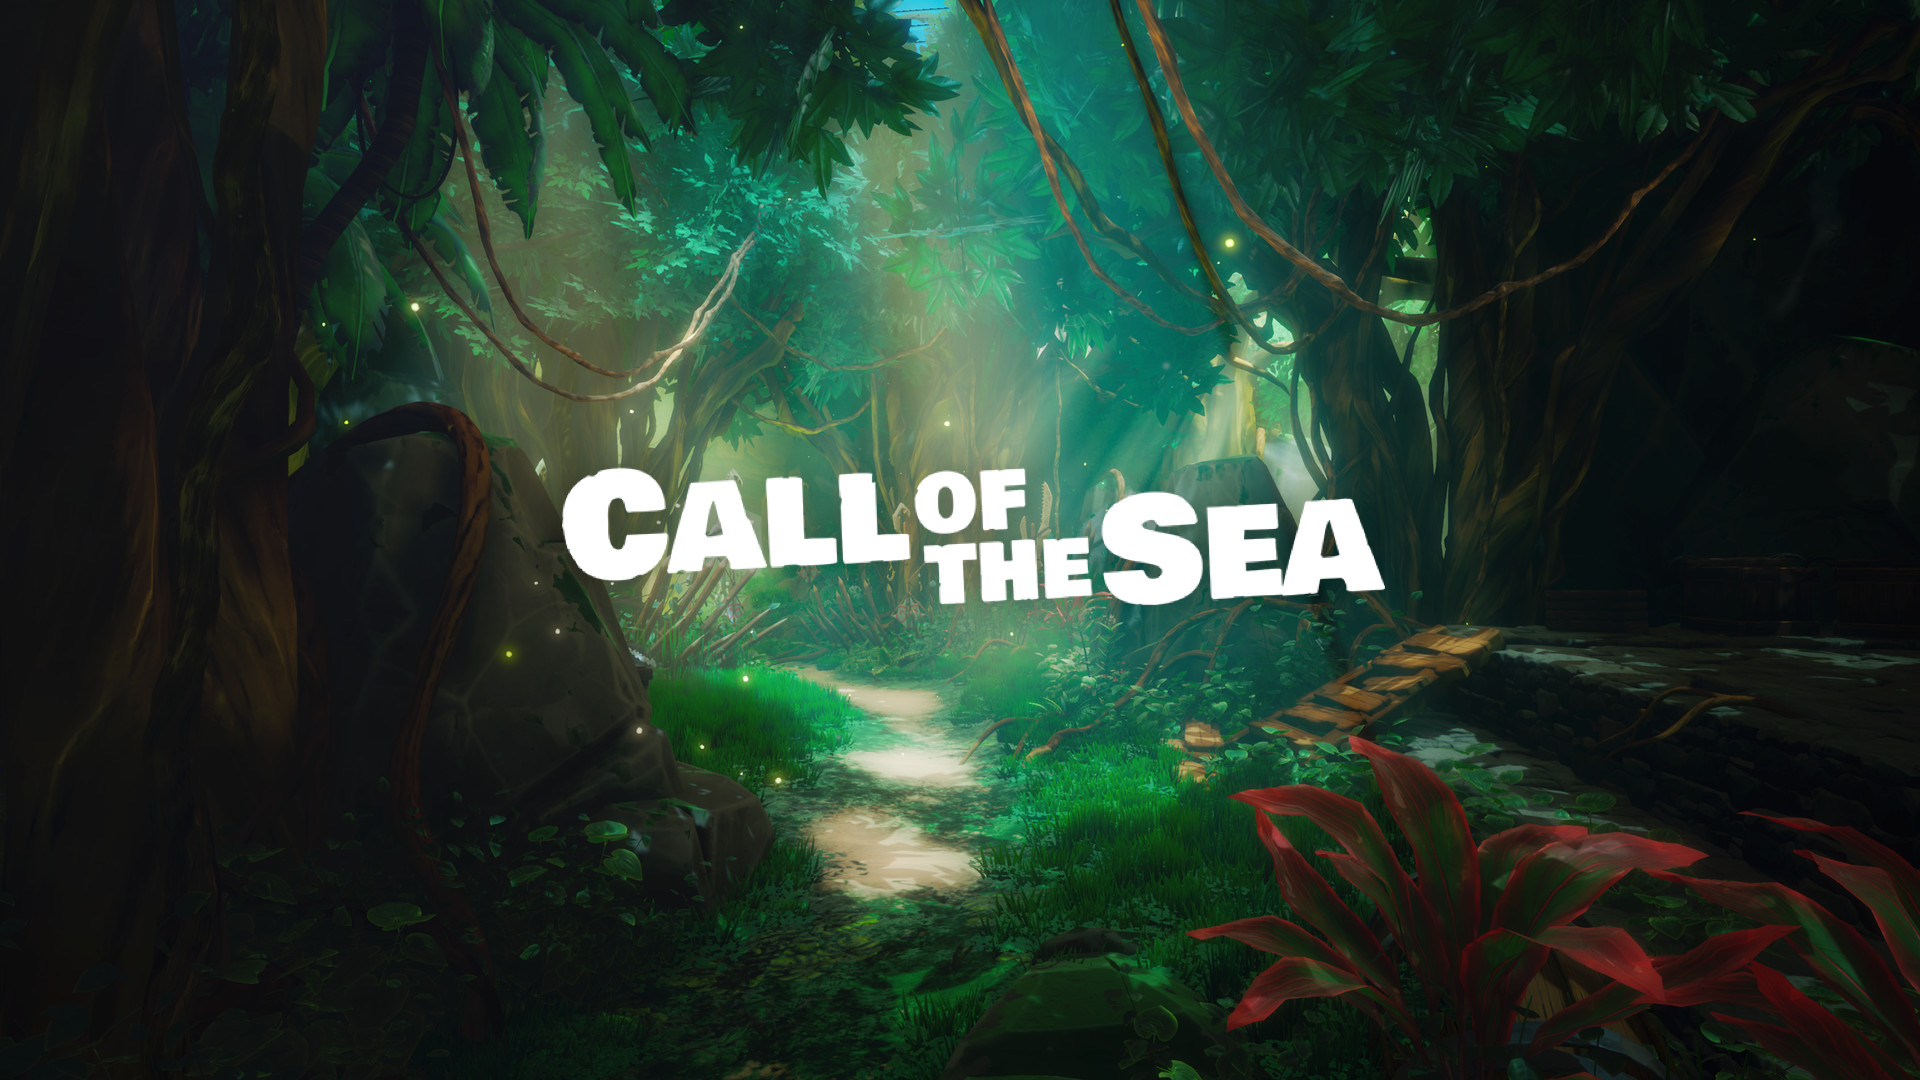 call of the sea story download free